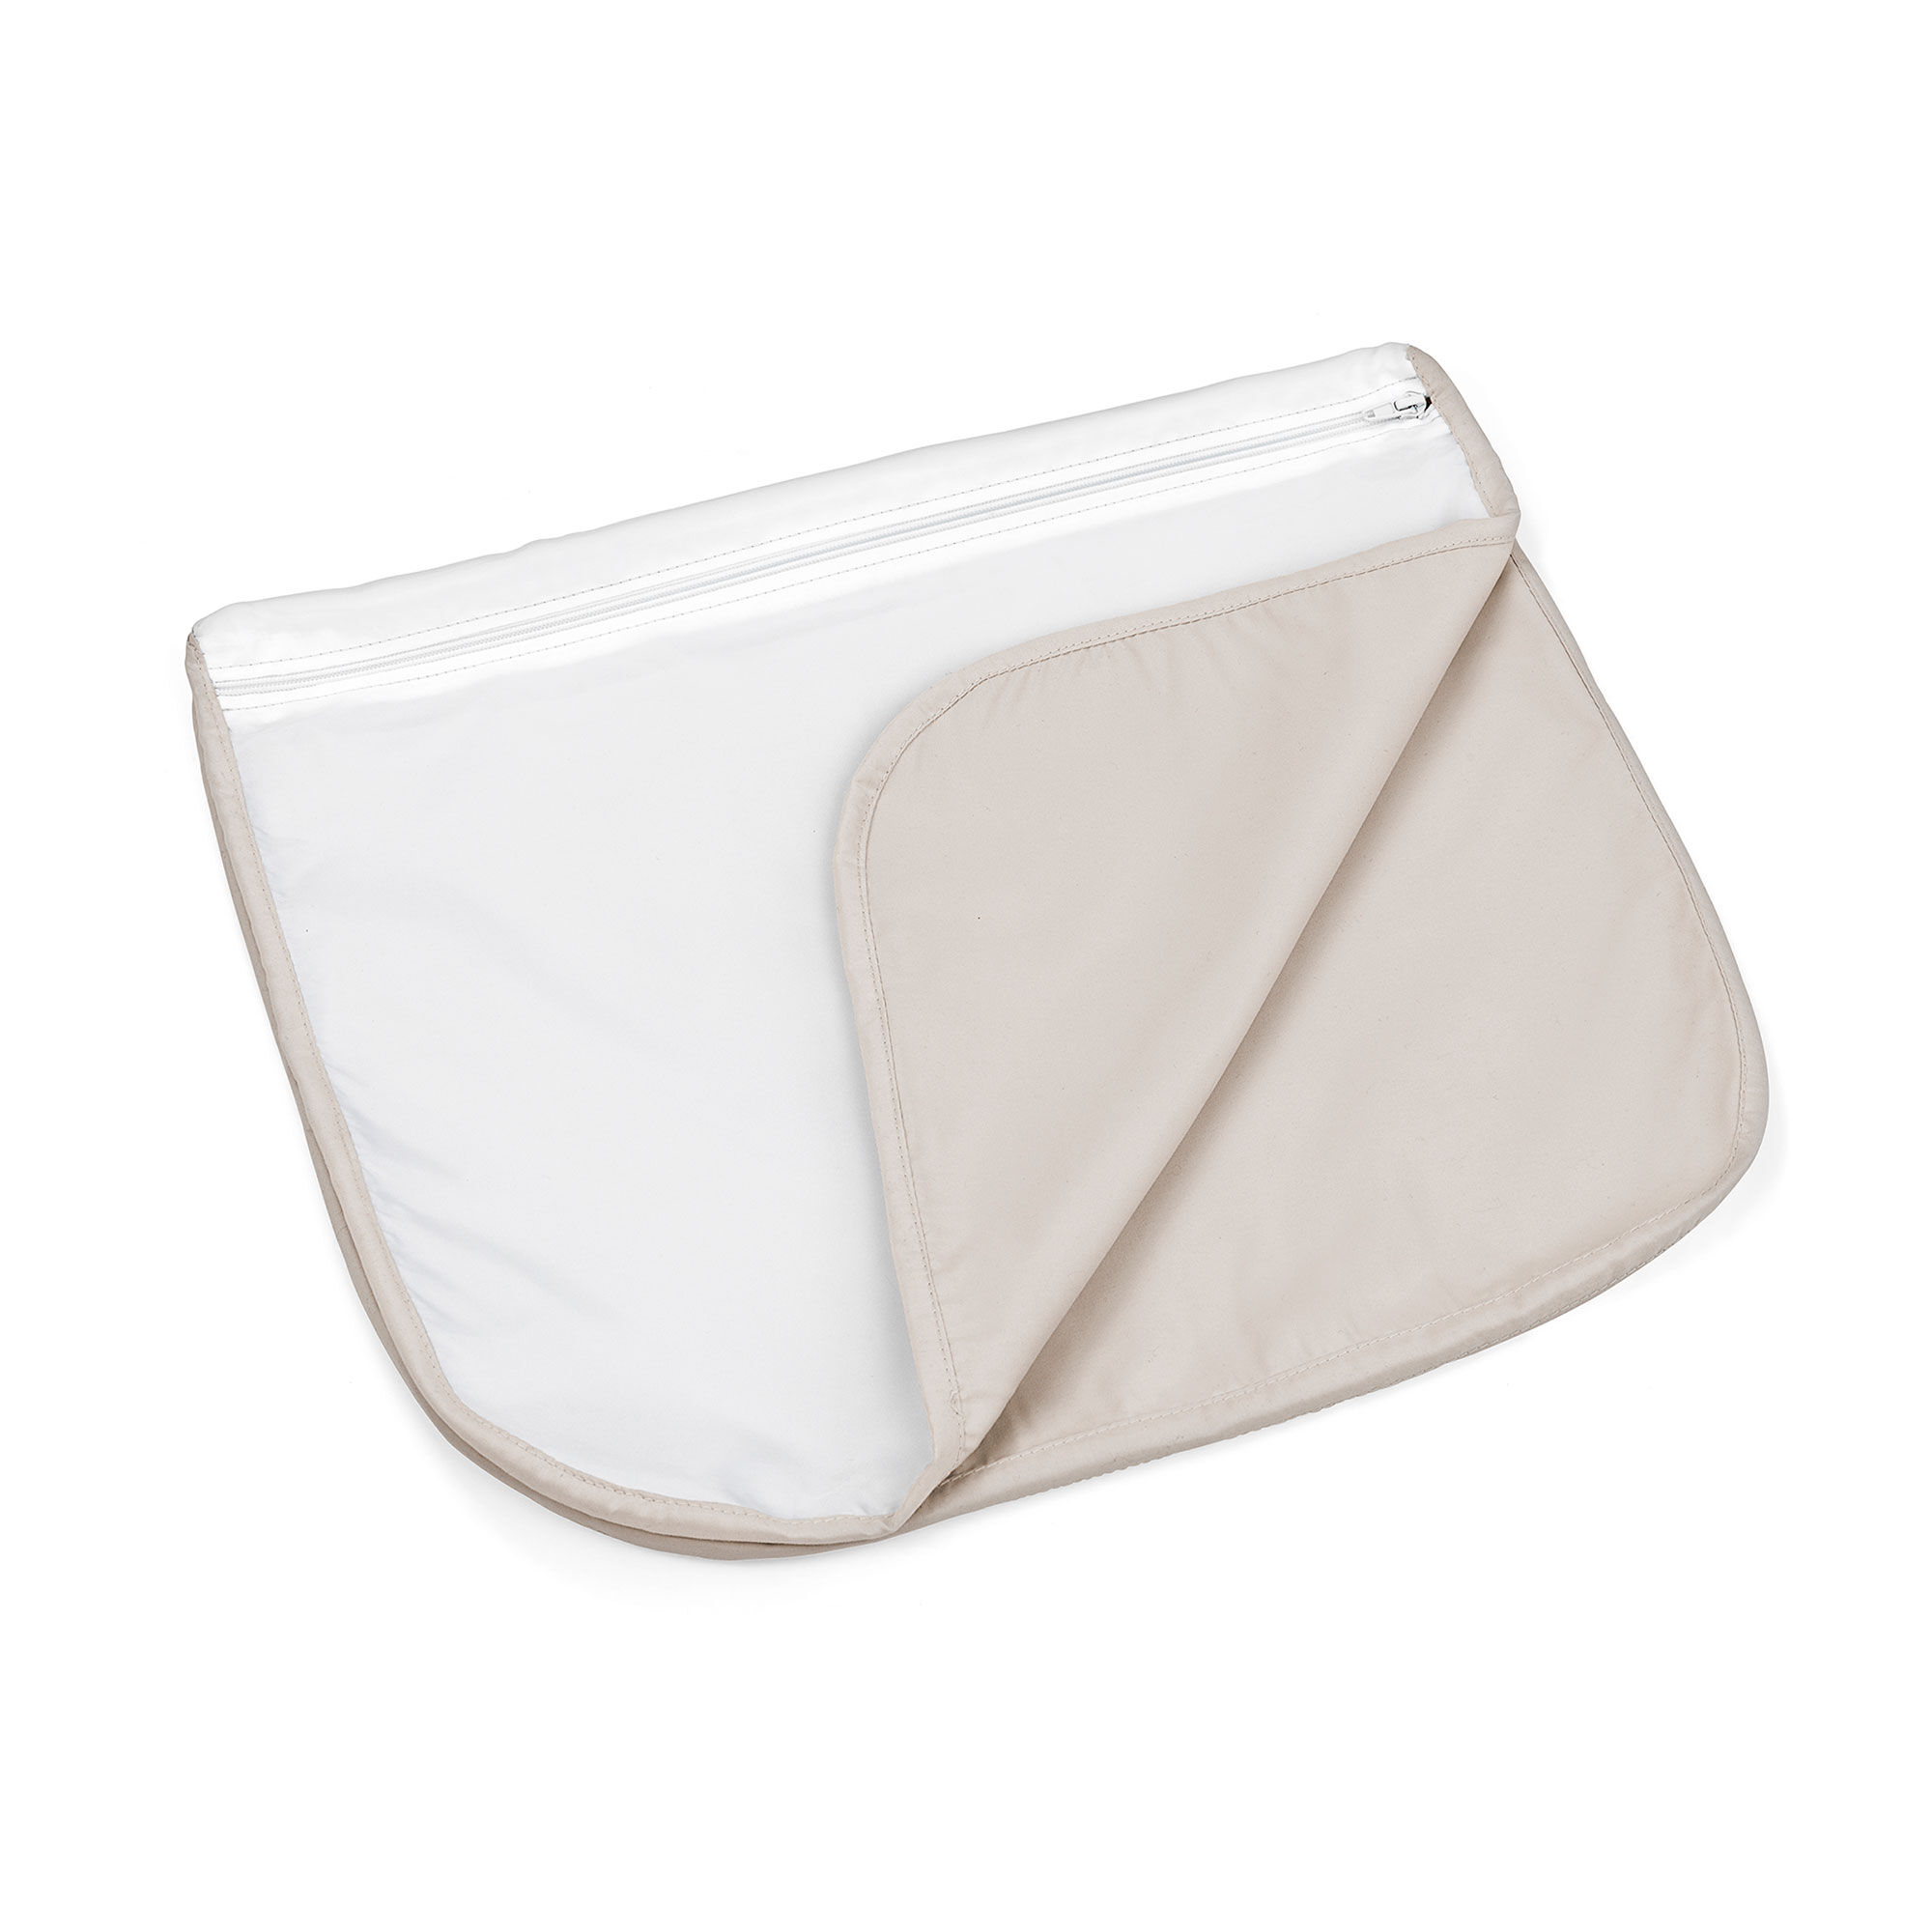 chicco lullago fitted sheet